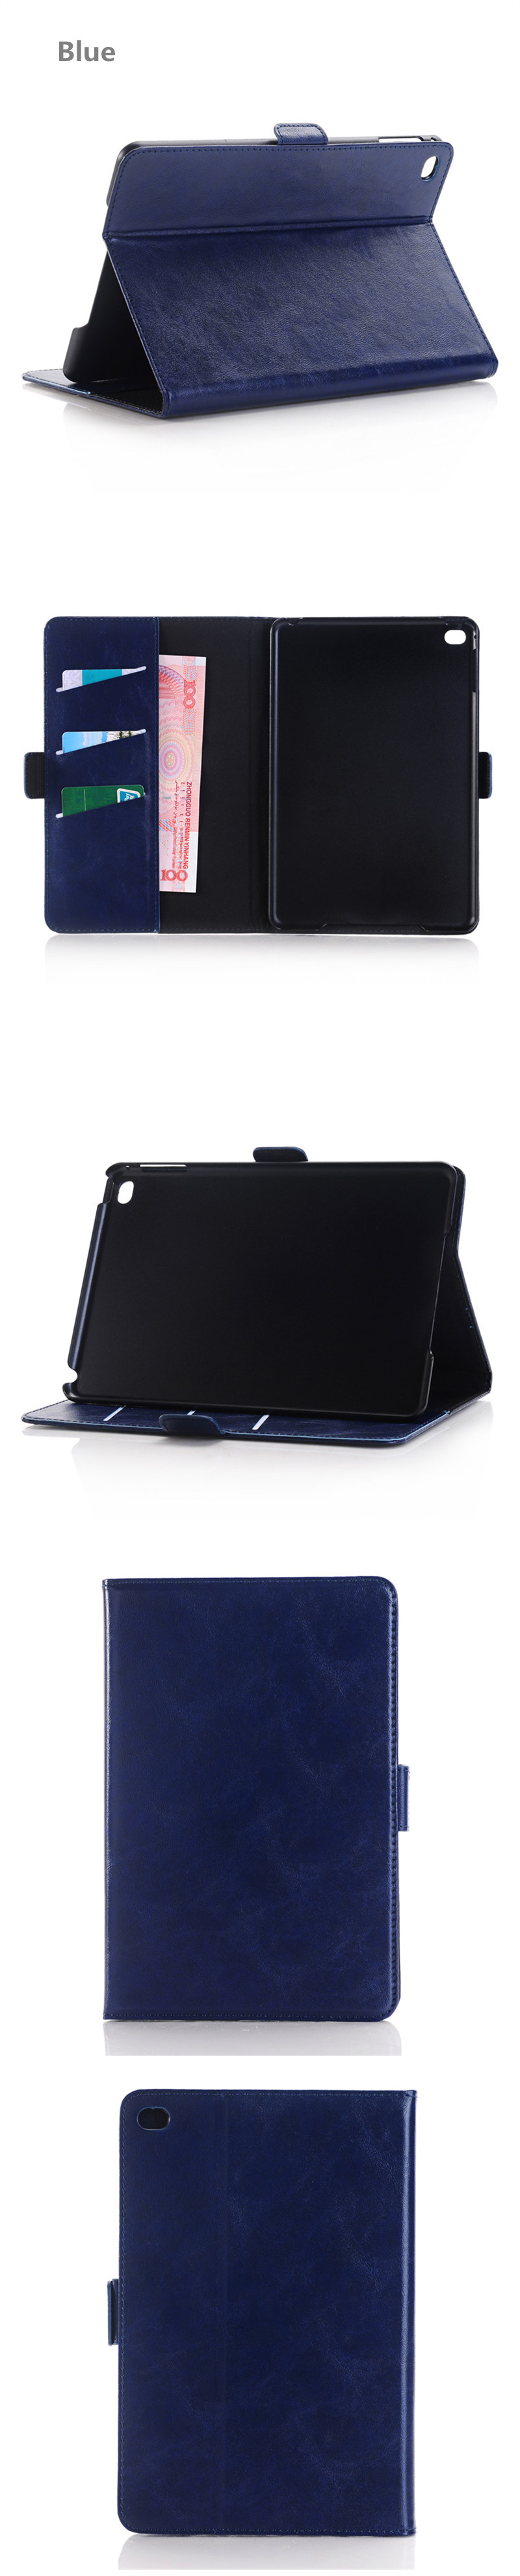 WLD-A005-Belt-Buckle-Shell-Flip-PU-Leather--Protective-Cases-For-iPad-Mini-4-1013508-4